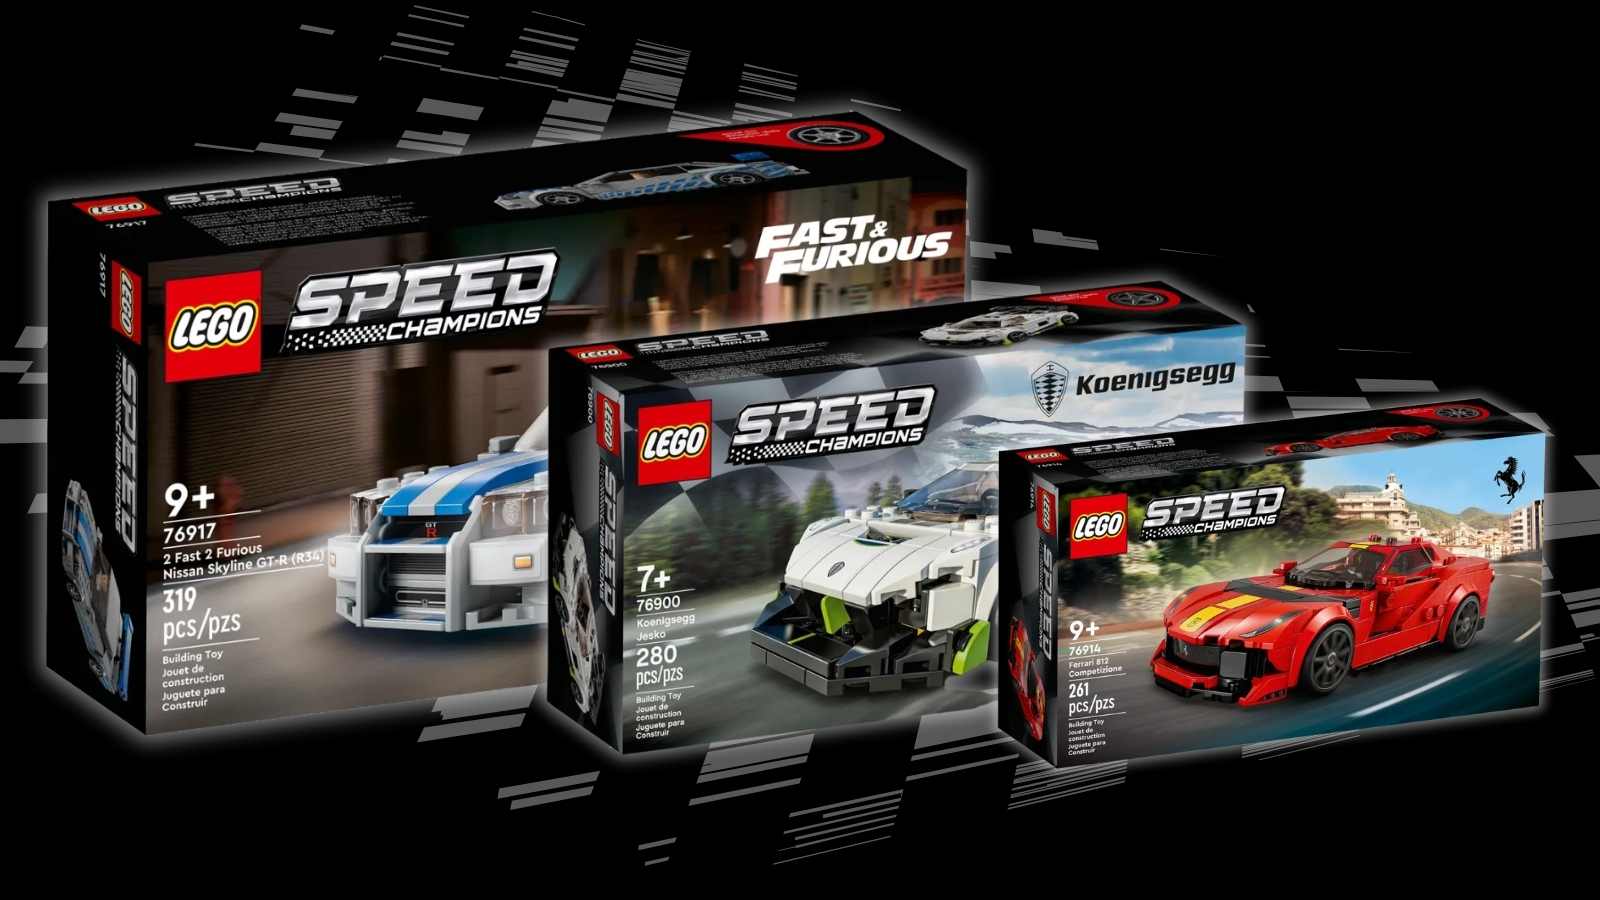 LEGO 76917 Speed Champions 2 Fast 2 Furious Nissan Skyline GT-R Race Car  Toy Model Building Kit & 76914 Speed Champions Ferrari 812 Competizione